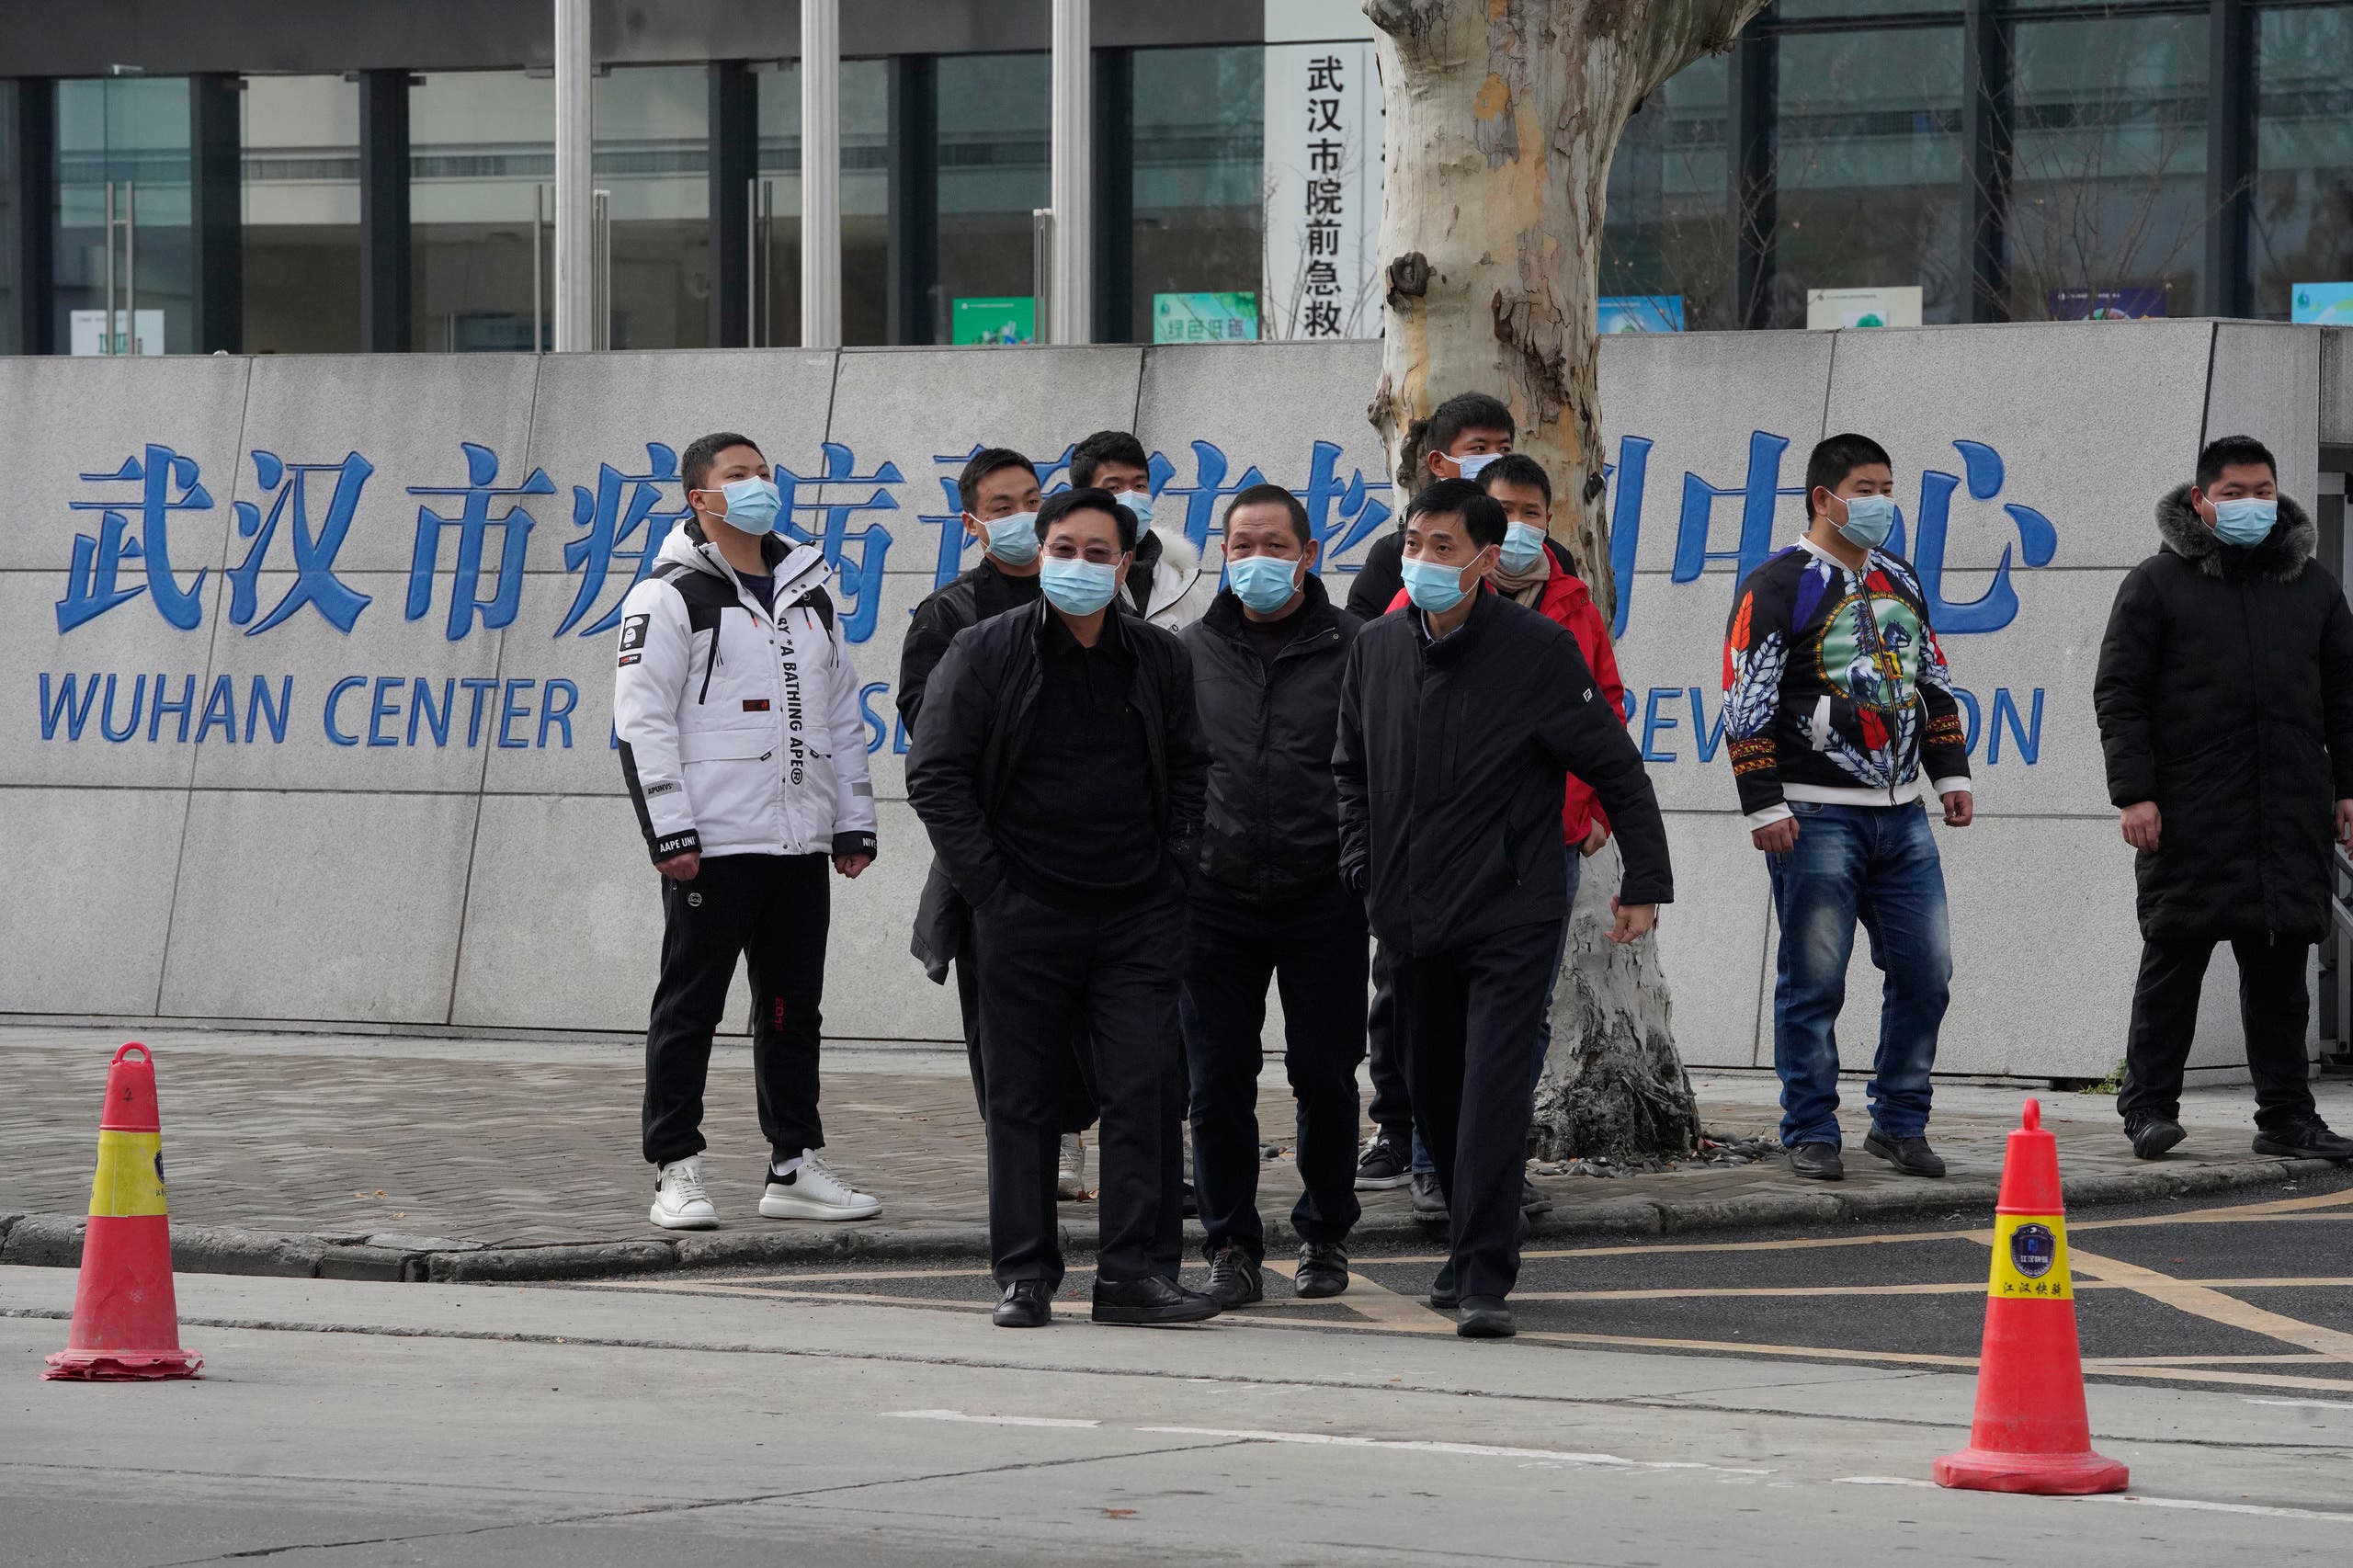 Plainclothes security personnel outside the Wuhan Center for Disease Control and Prevention ahead of the WHO team's arrival on February 1.